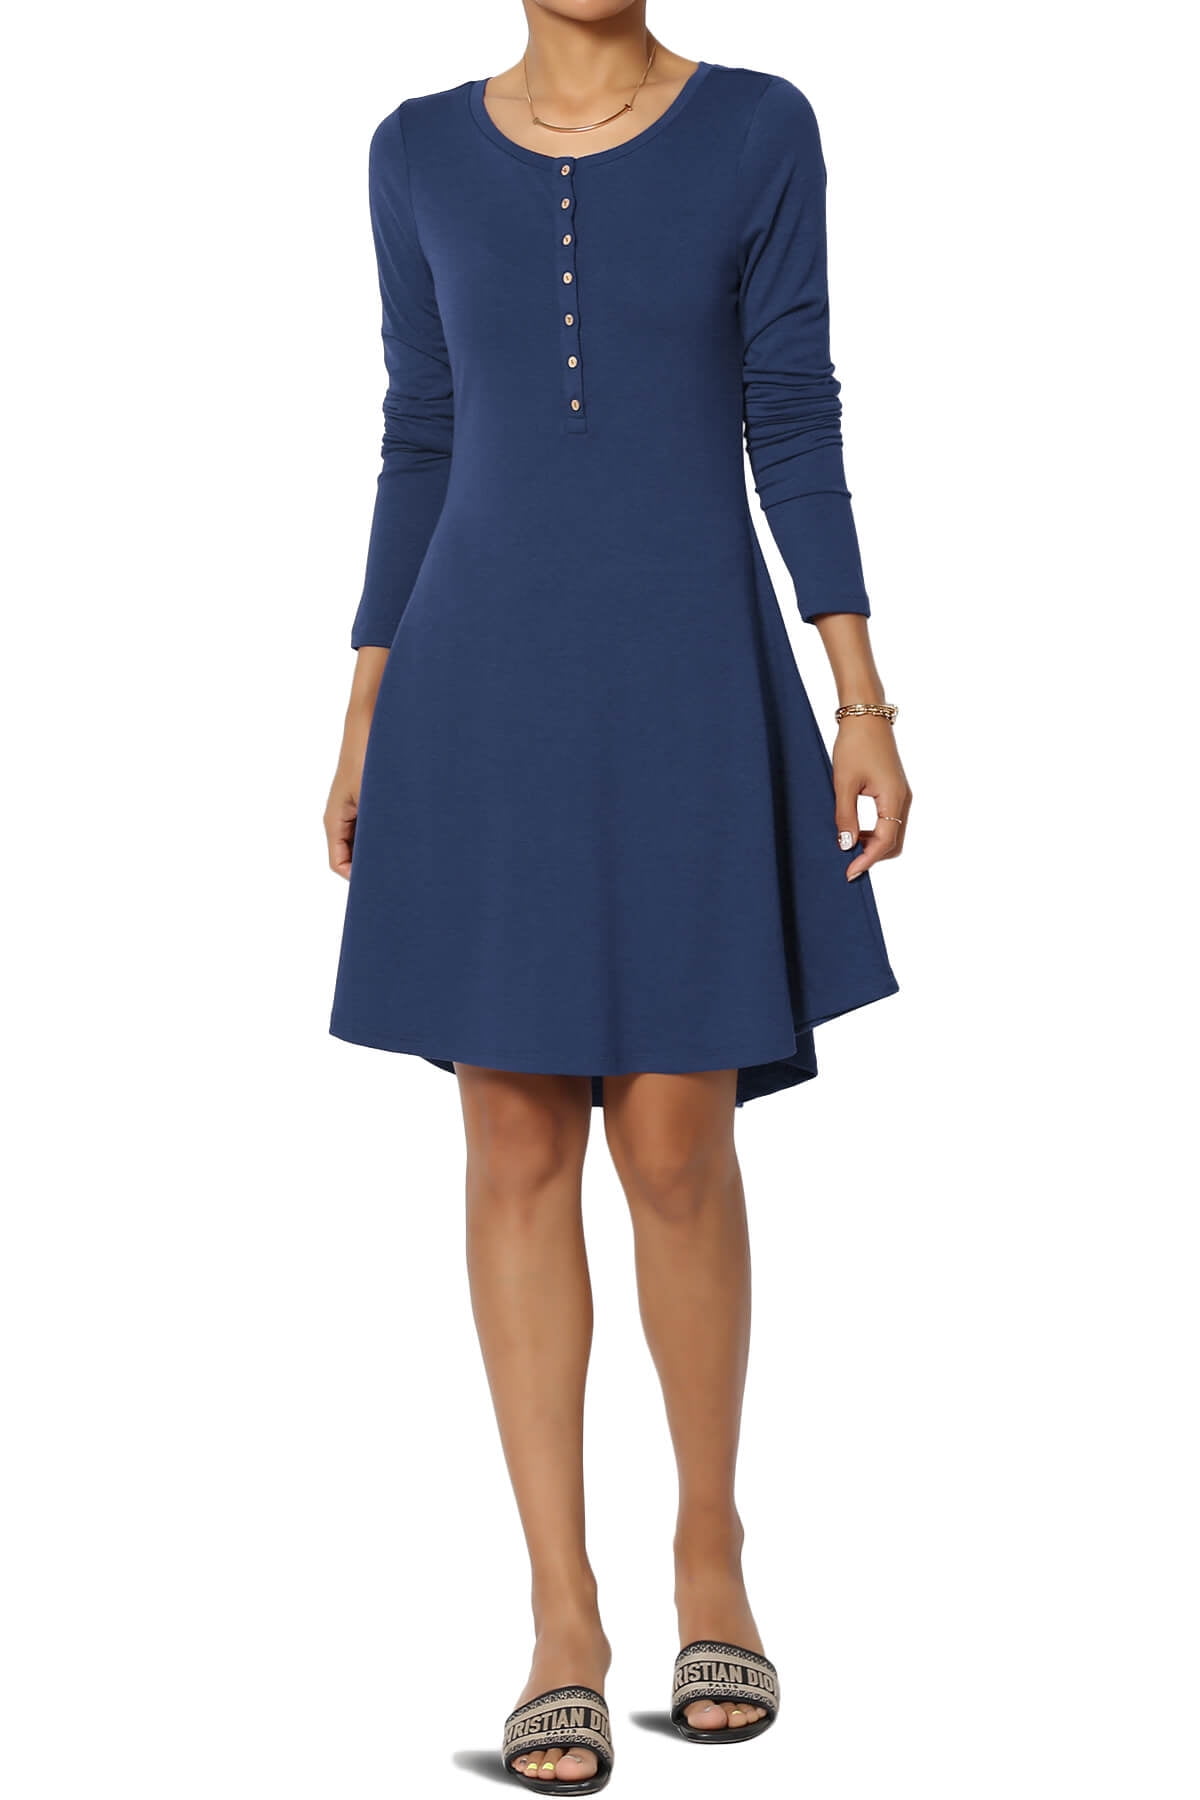 Women's Blue Fit And Flare Dress Long Sleeve Scoop Neck